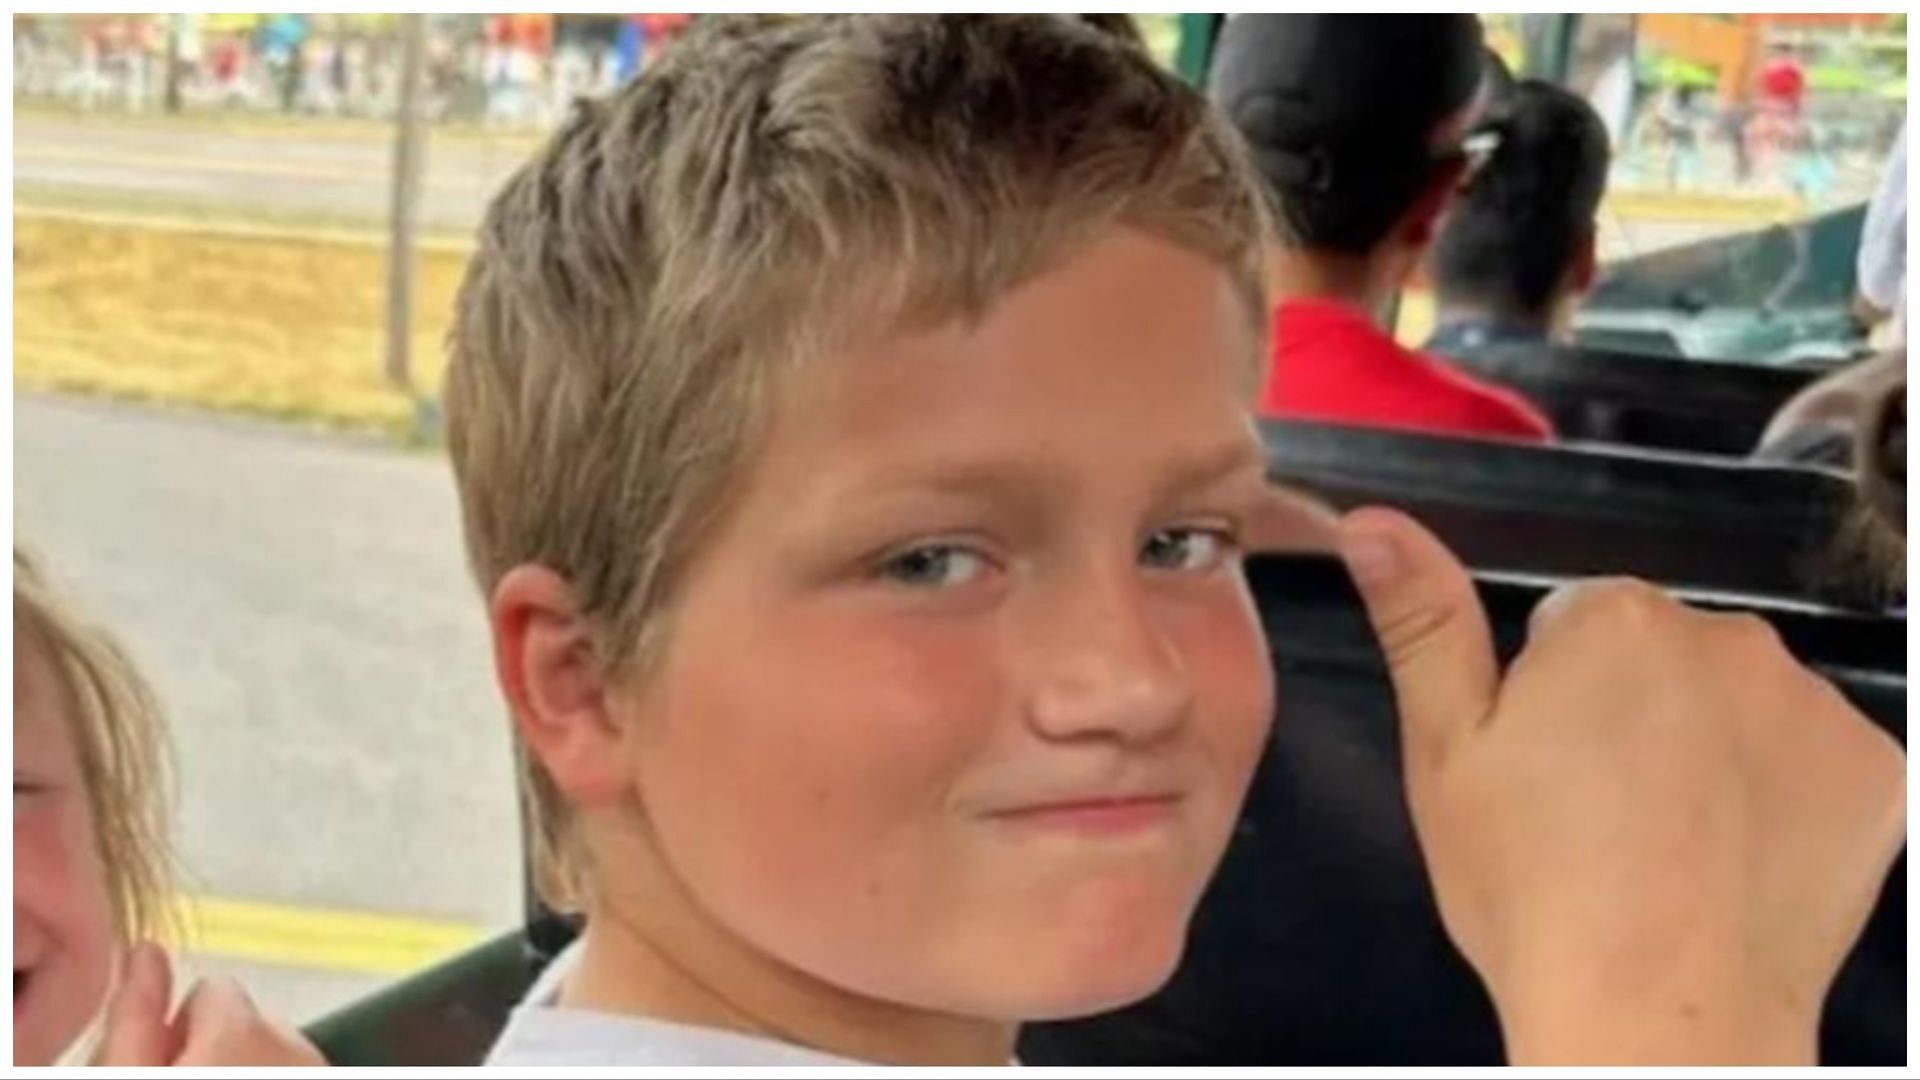 Huntley Daniels sustained severe injuries after falling from a carnival ride, (Image via GoFundMe)